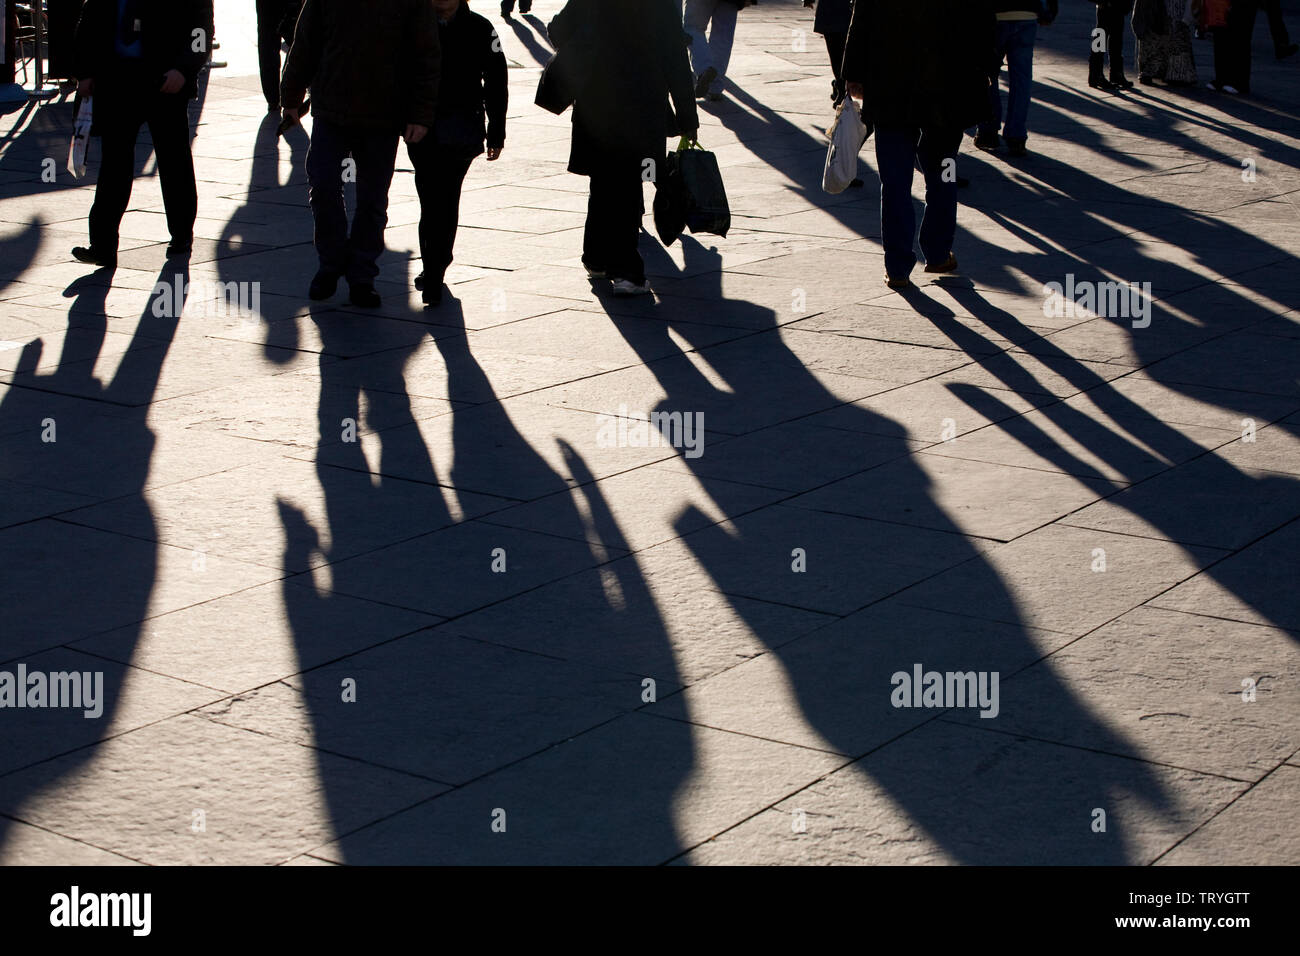 The long shadows of shoppers in a high street in Newcastle upon Tyne, England Stock Photo